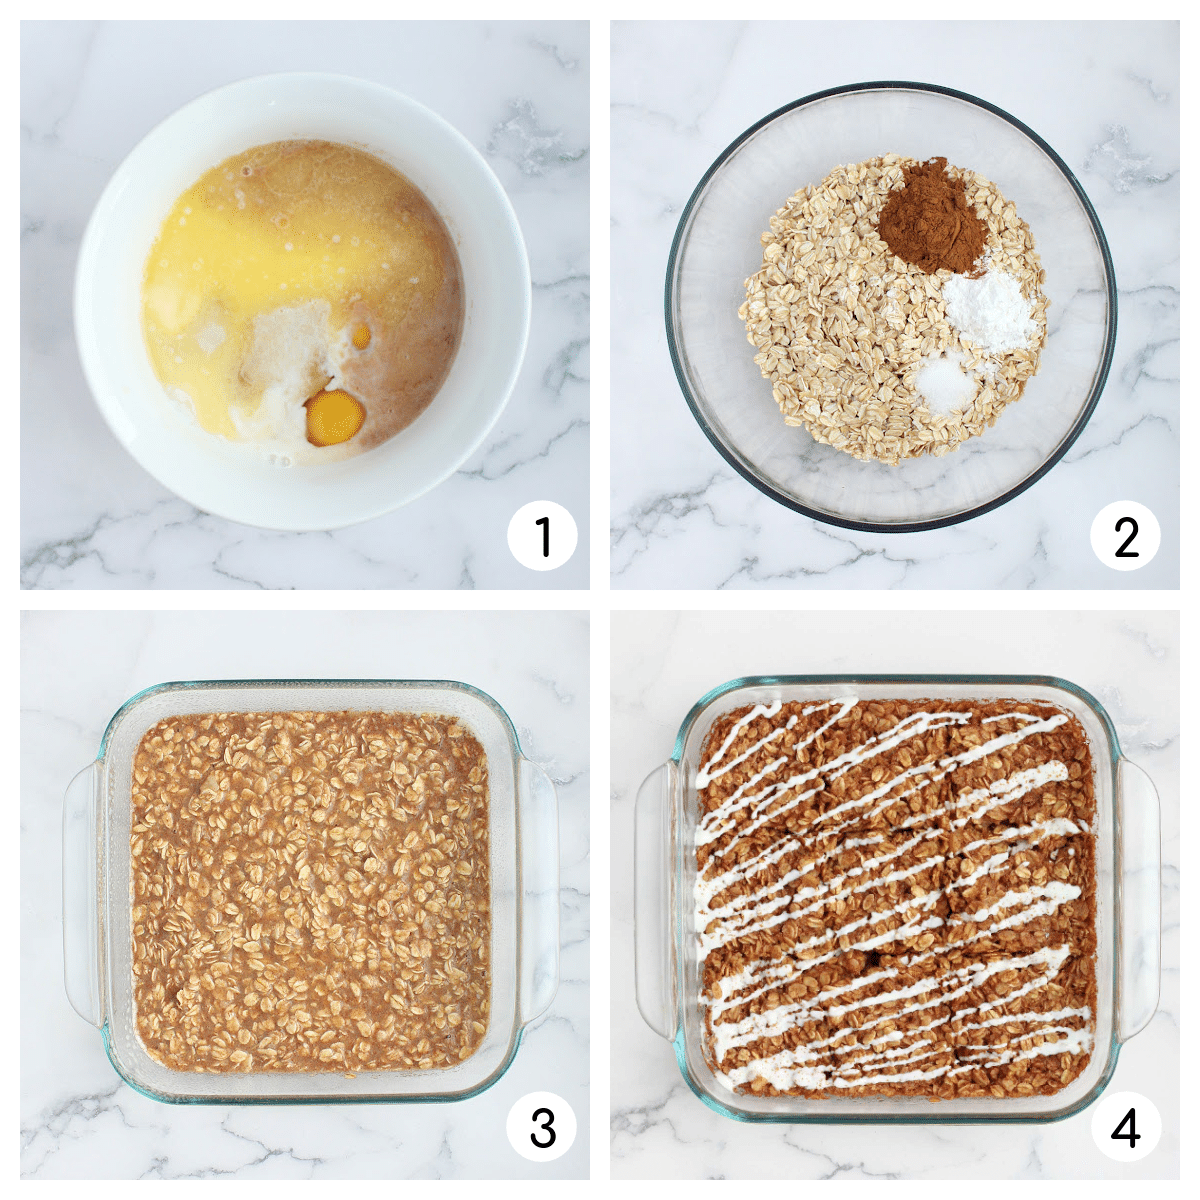 Process shots for how to make cinnamon roll baked oatmeal